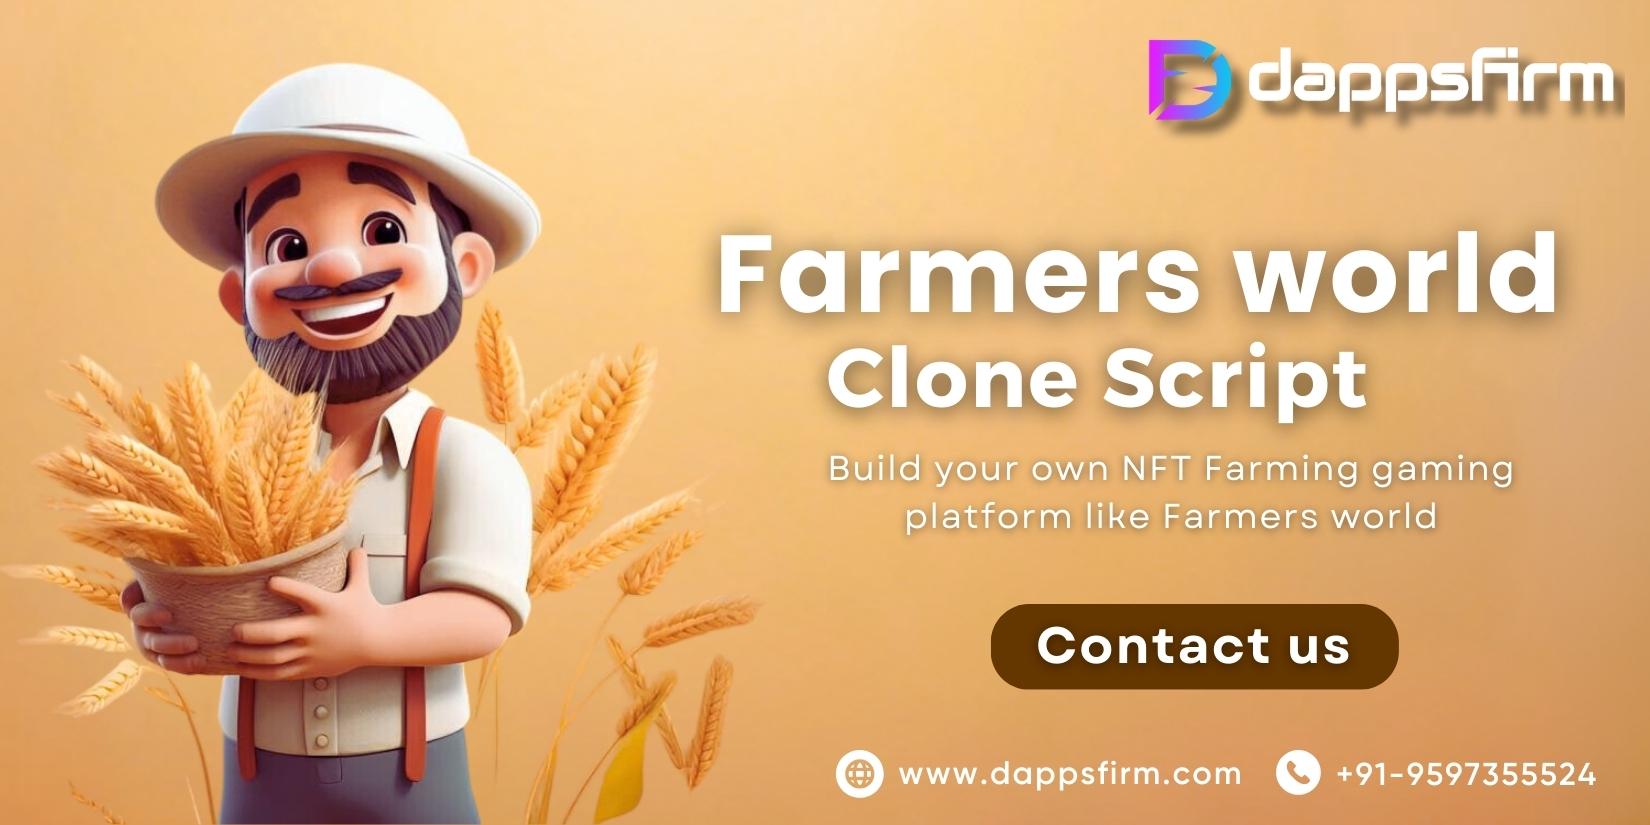 Farmers Clone Script - To launch your own NFT farming game